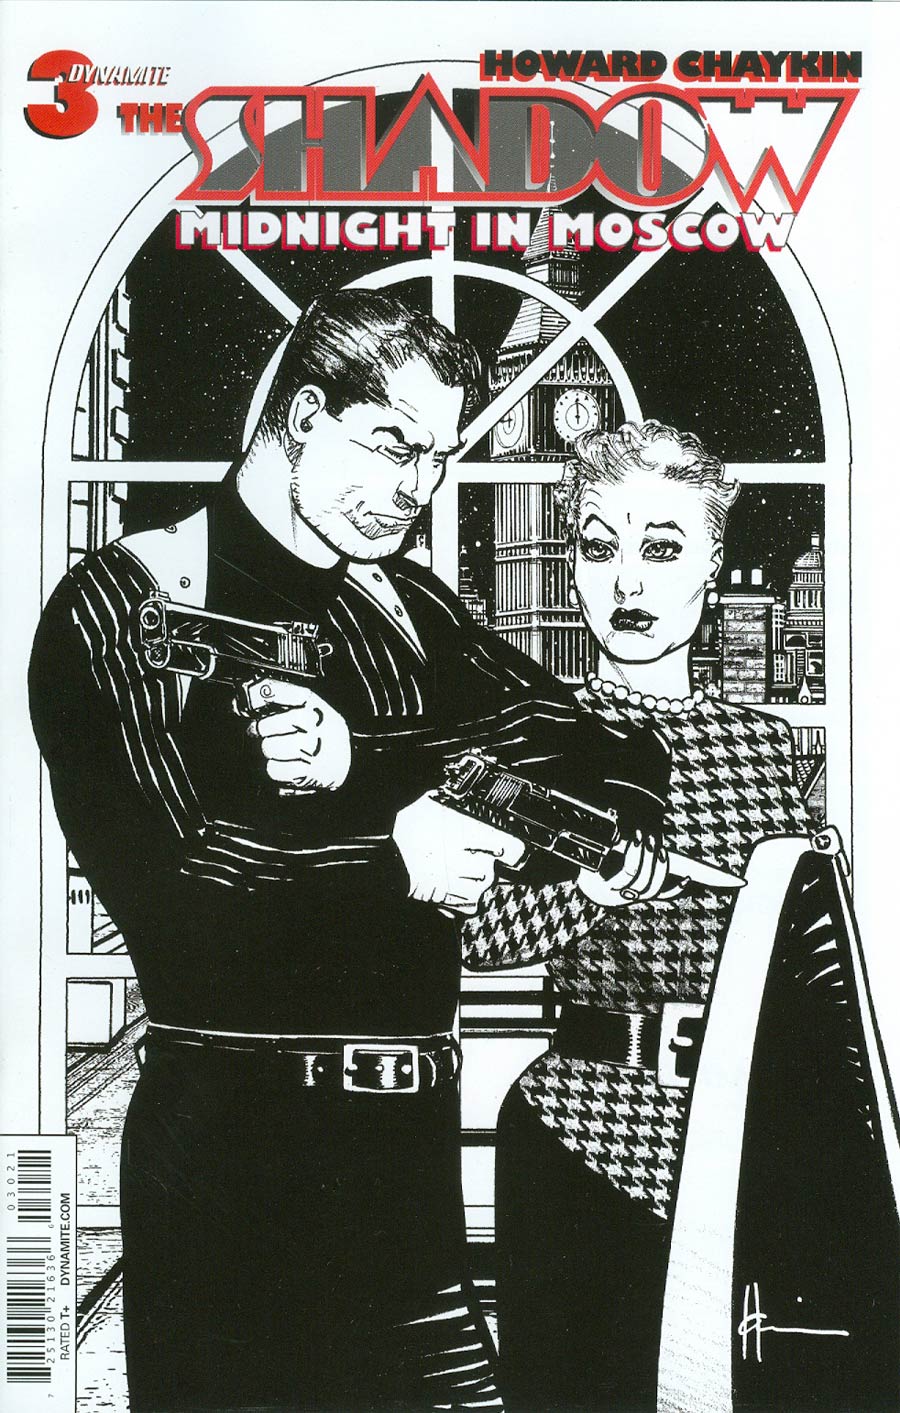 Shadow Midnight In Moscow #3 Cover B Variant Rare Howard Chaykin Black & White Cover